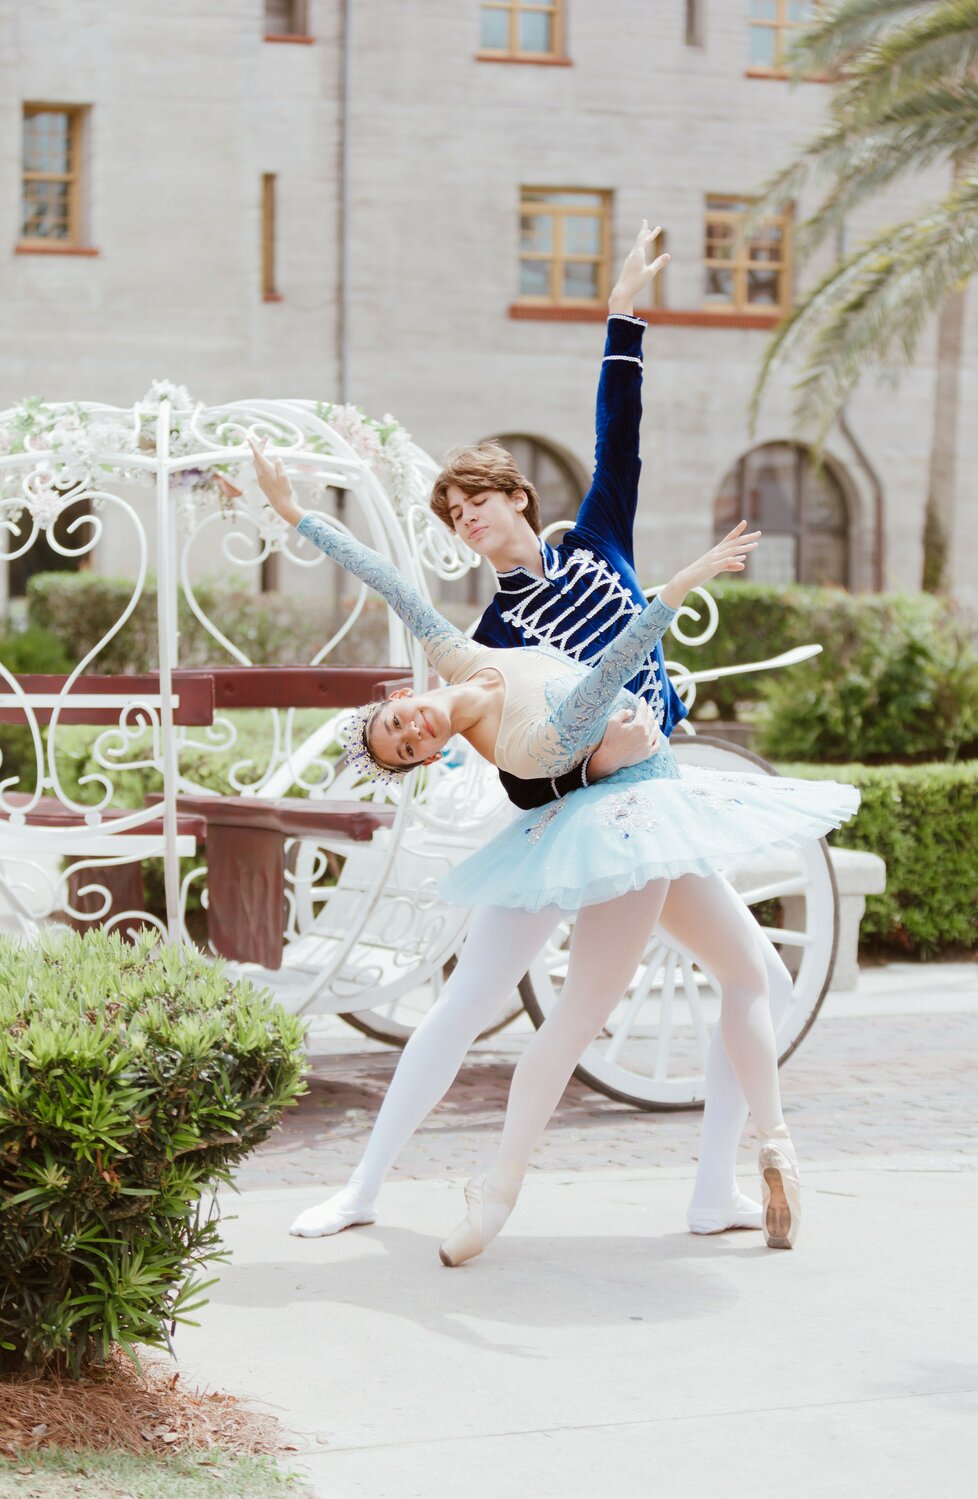 Dancers Claudia Mueckay and Jake Karger as Cinderella and the Prince in ‘Cinderella’ to be presented May 20 and 21 at Lewis Auditorium in St. Augustine.